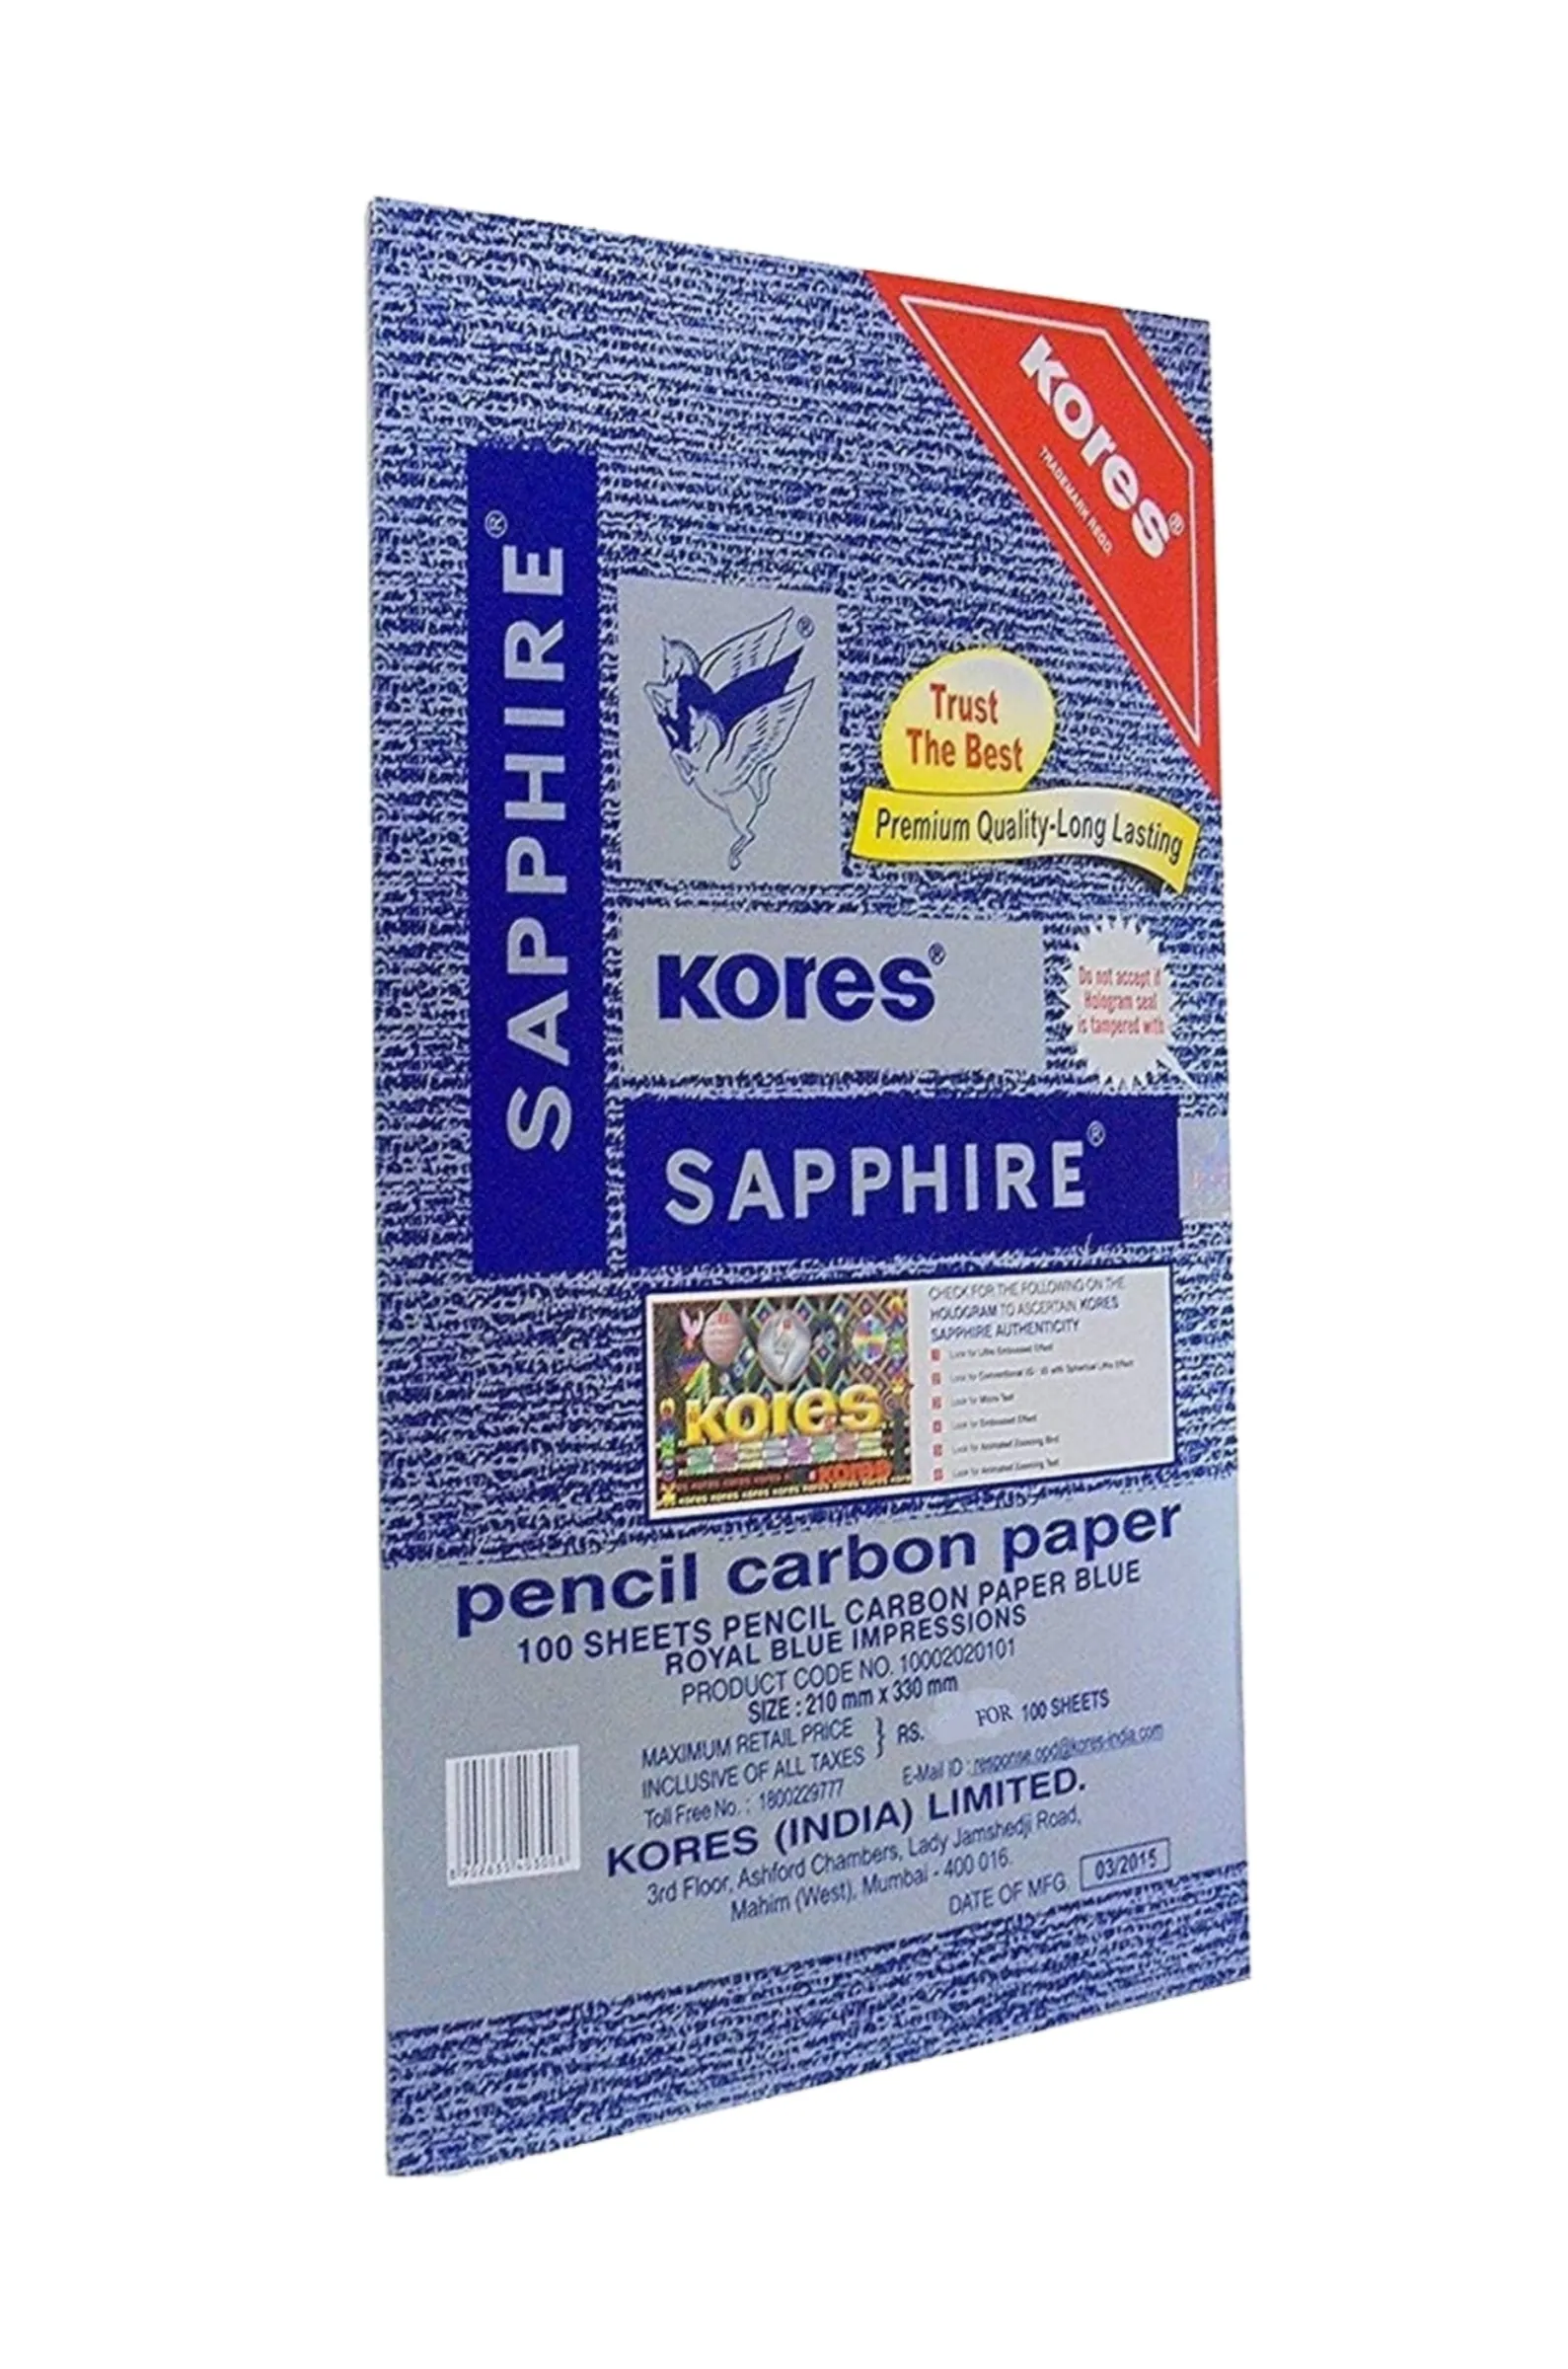 Kores Sapphire Pencil Carbon Paper, Royal Blue, 1 Pack of 100 Sheets